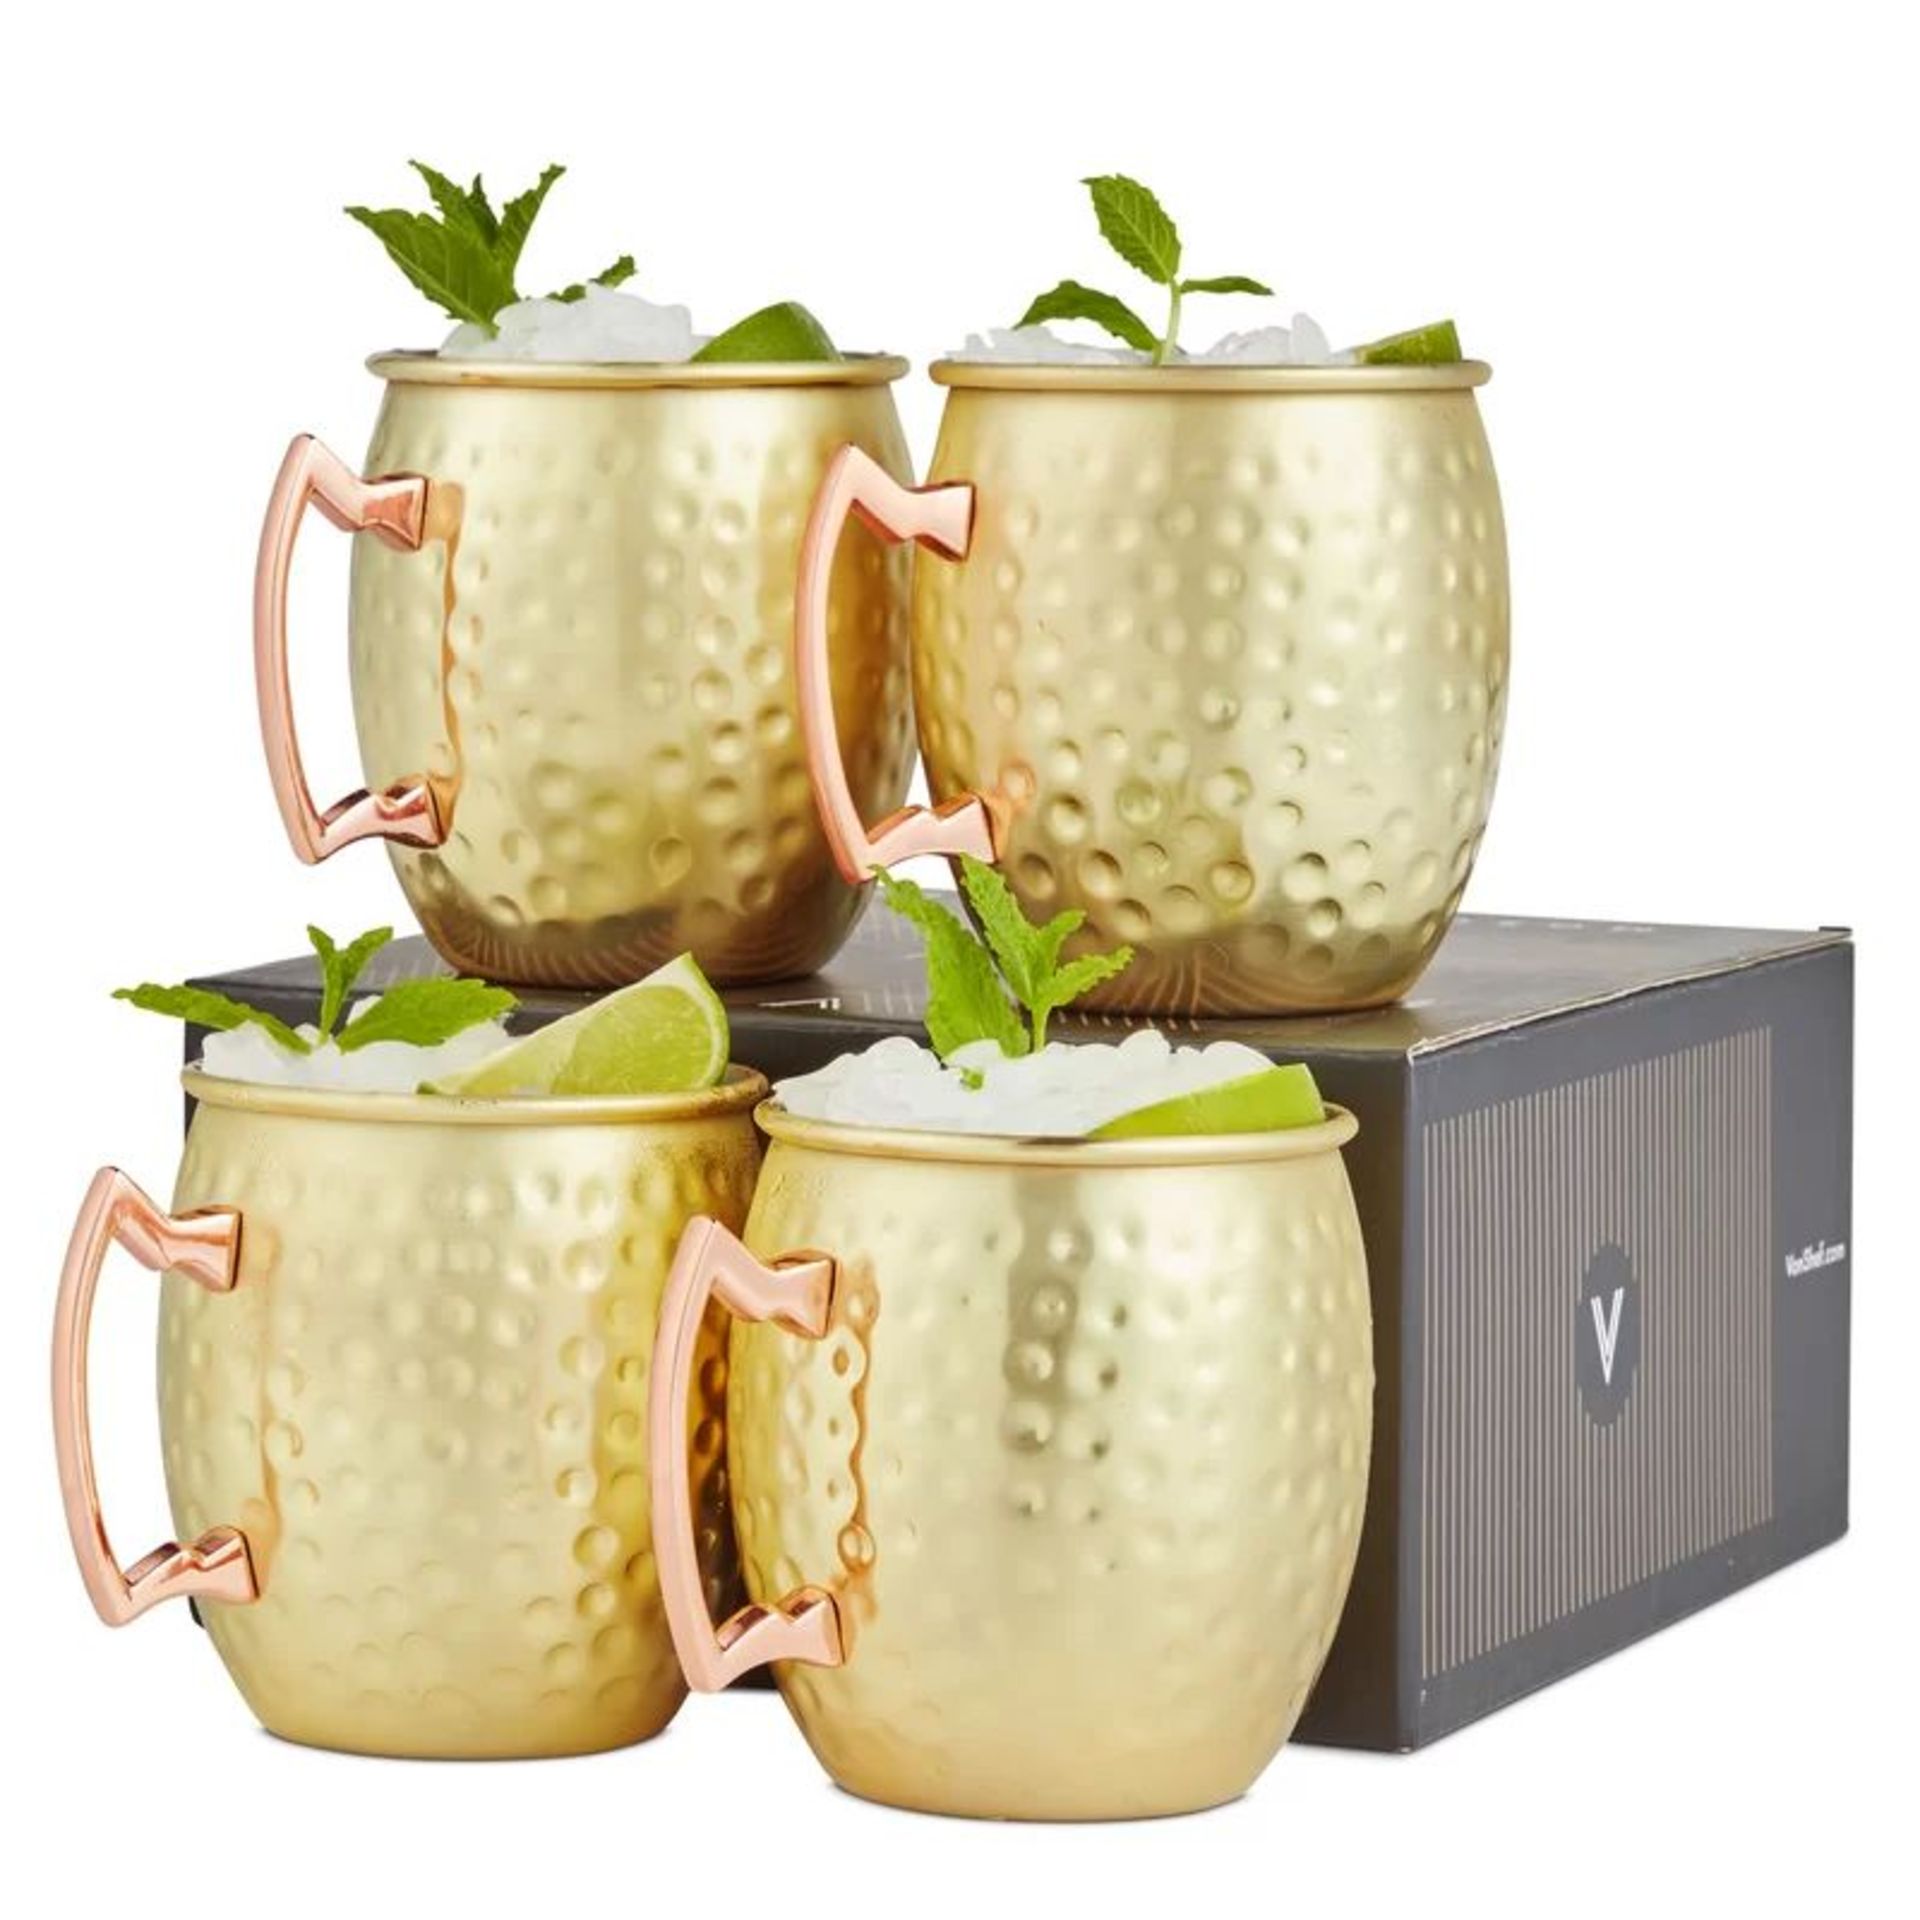 5x NEW & BOXED 16oz. Stainless Steel Moscow Mule Mug Set Of 4. RRP £44.99 EACH. (061). Serve up